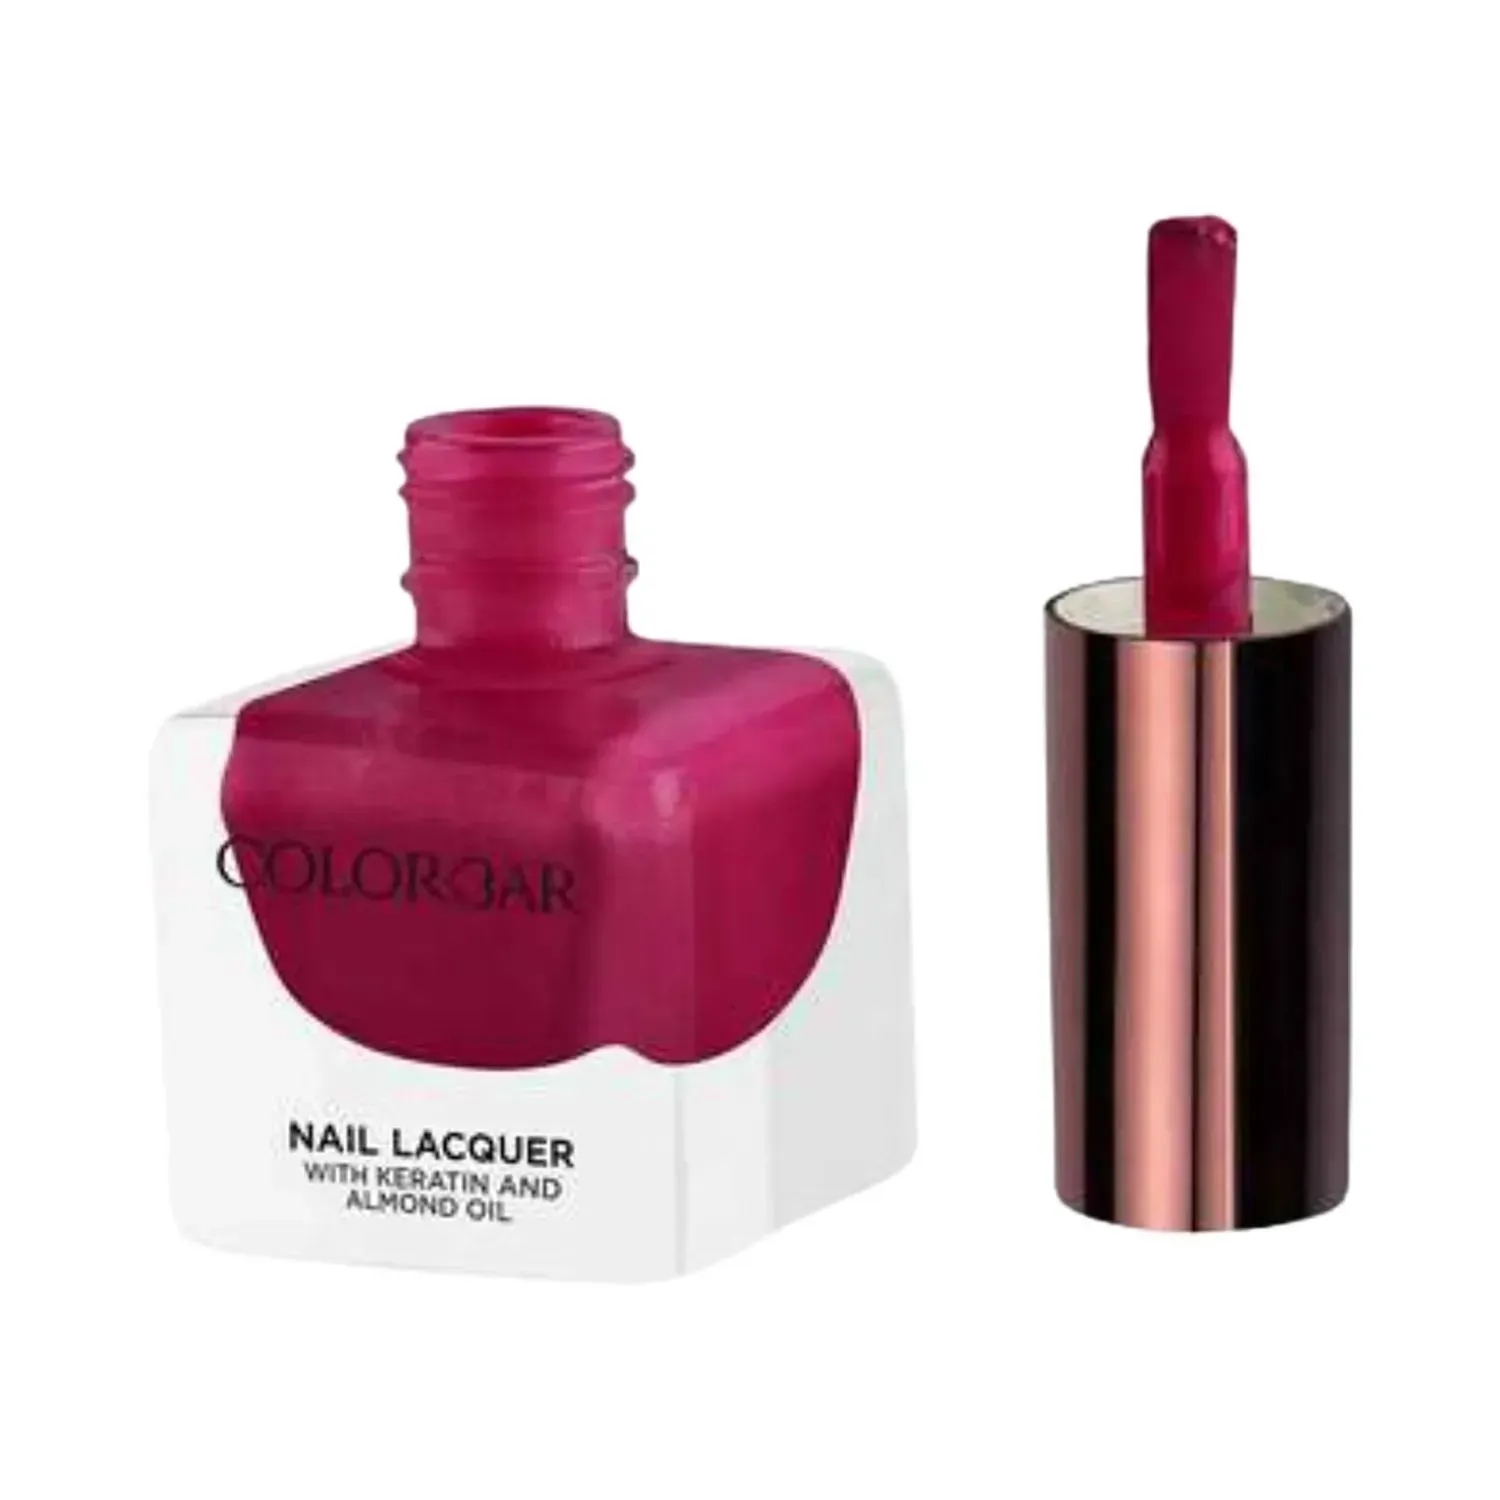 Colorbar | Colorbar Lux Nail Lacquer - 246 Polka Pink (12ml)